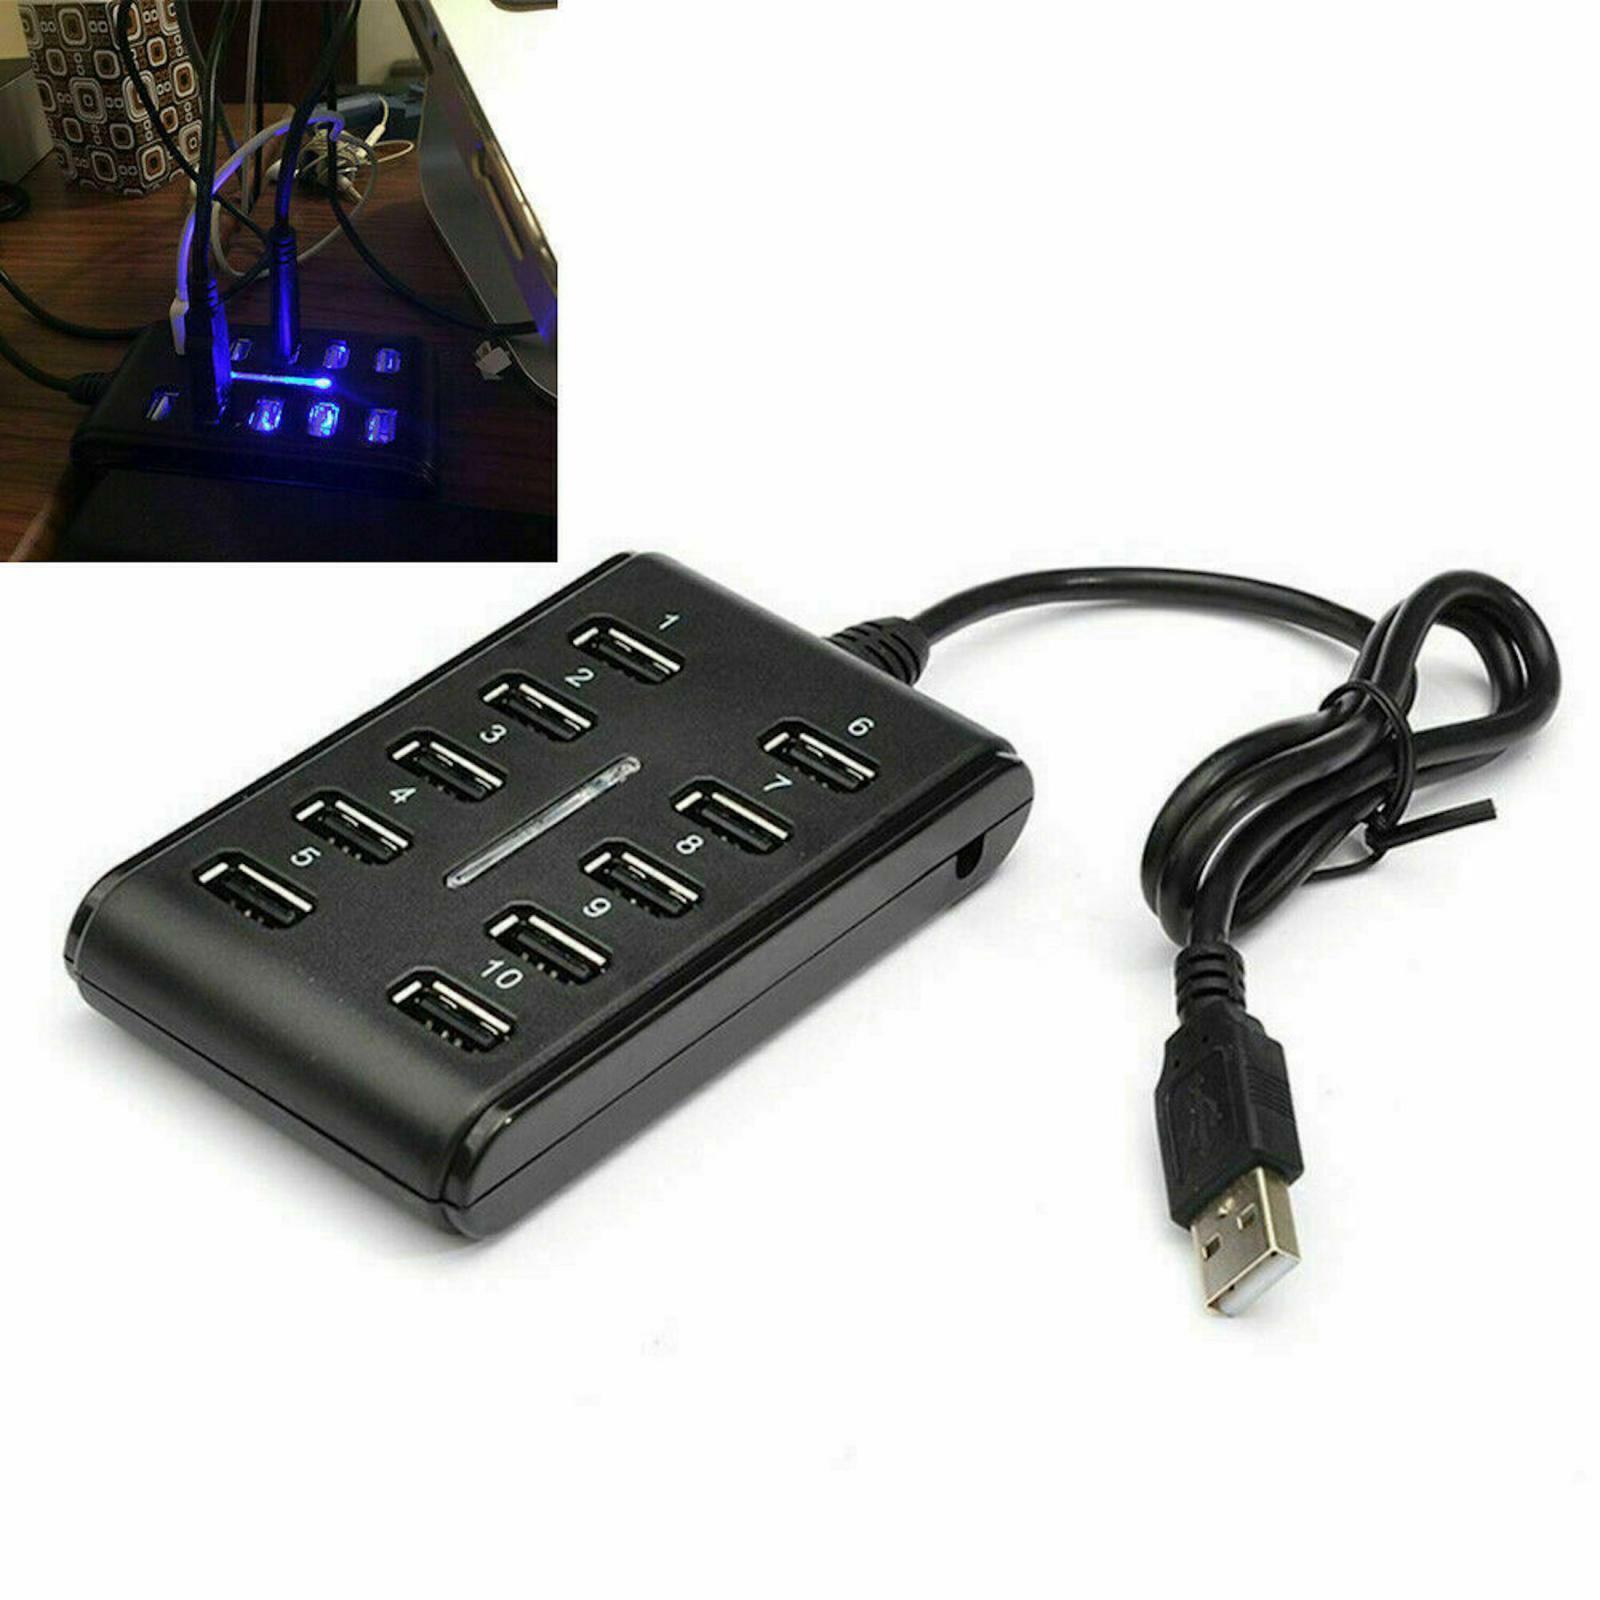 10 Port Hub USB 2.0 High Speed Multiple Splitter Adapter Extension Cable